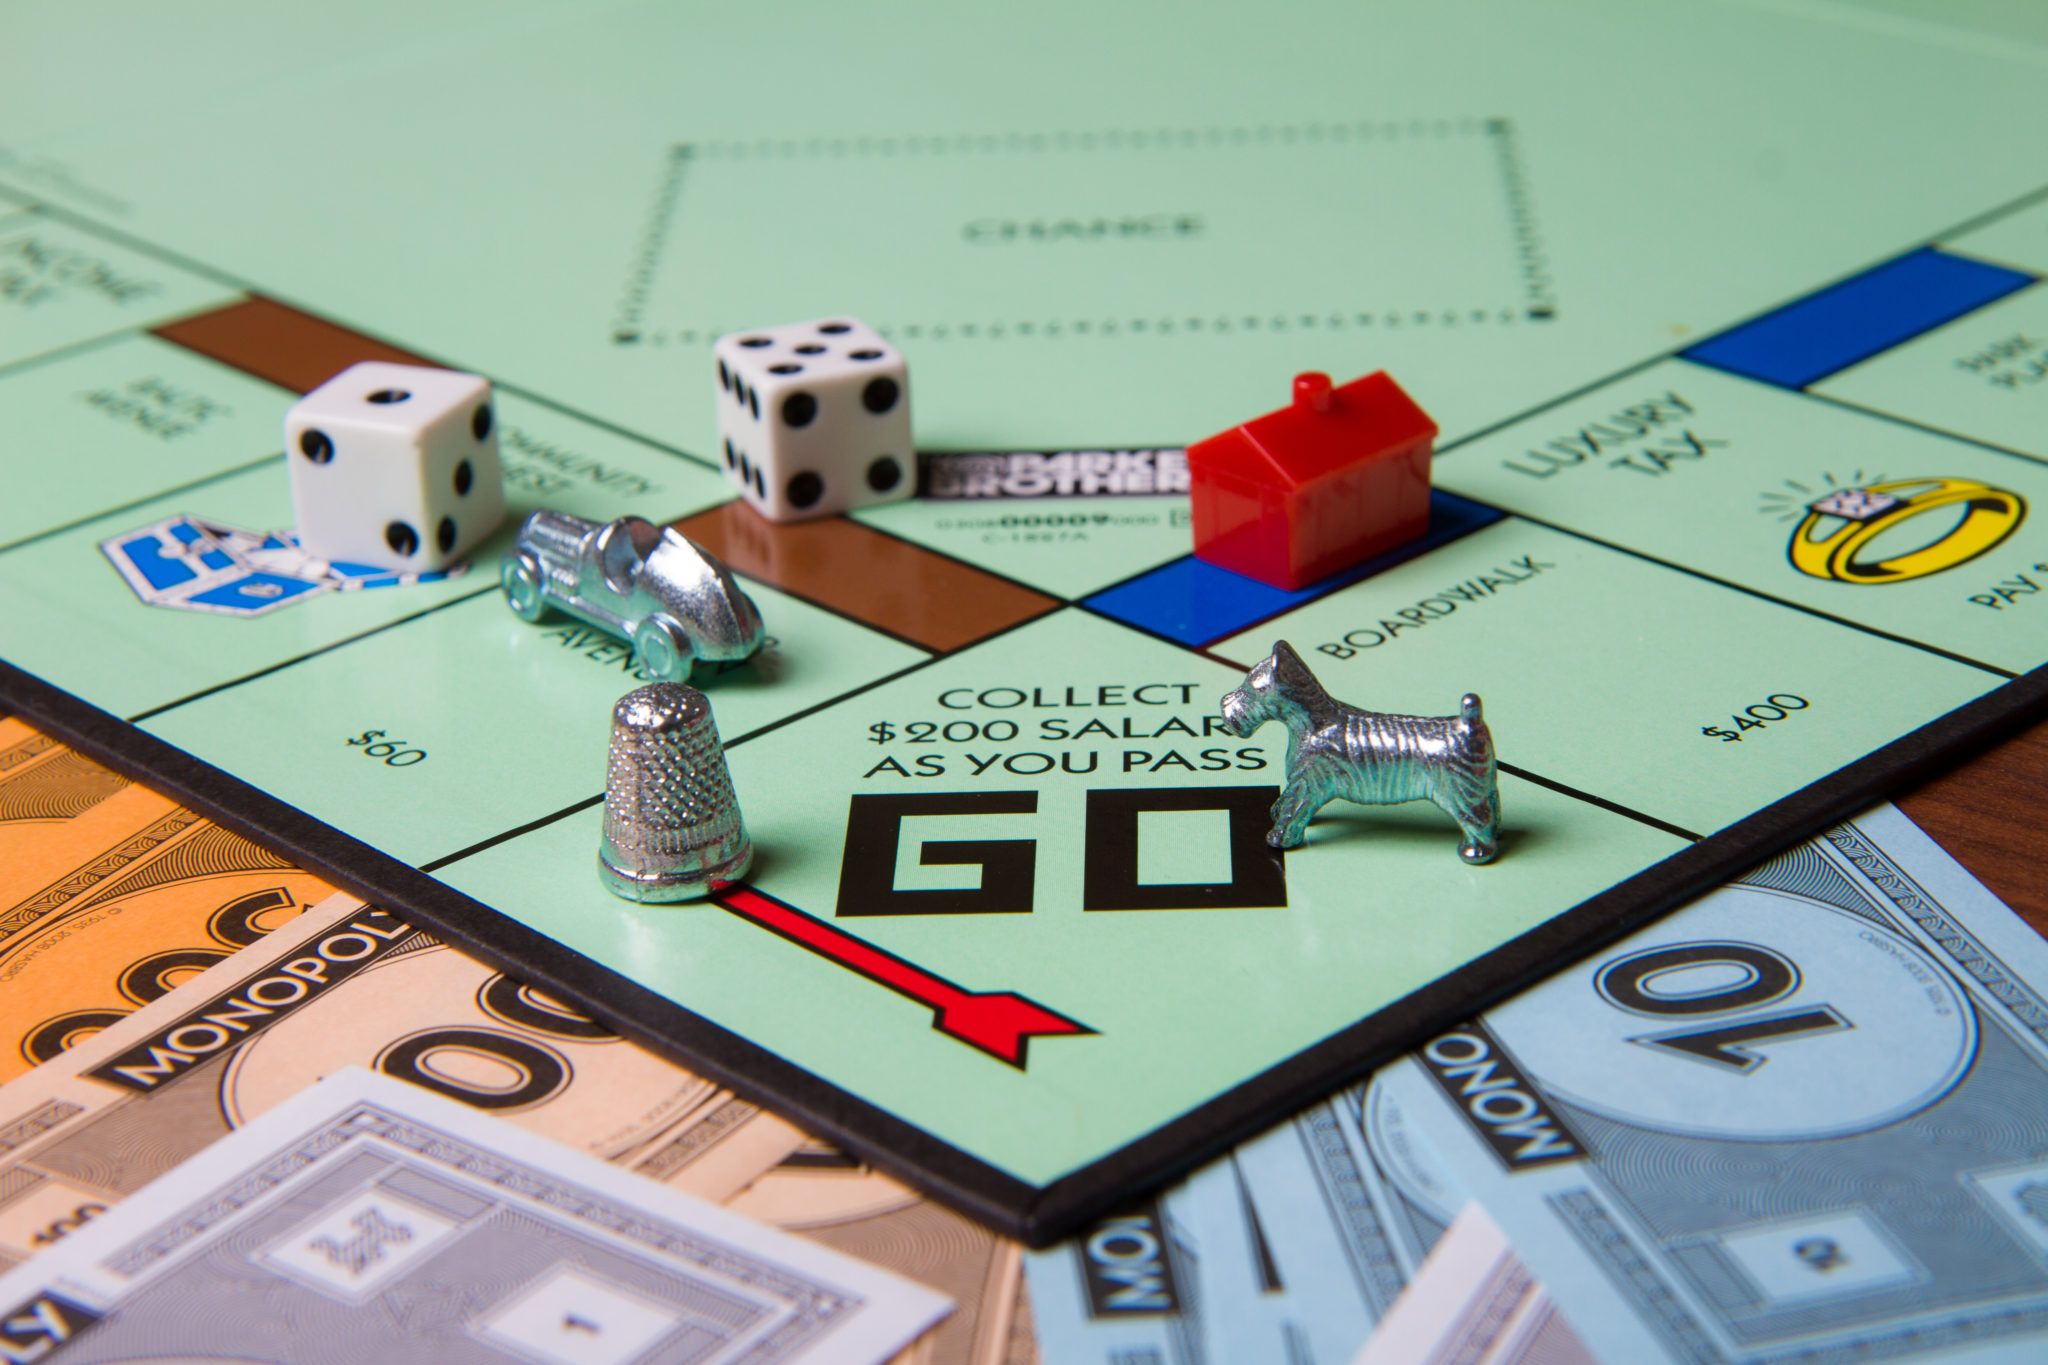 Were you aware of this Monopoly rule that has people absolutely baffled?